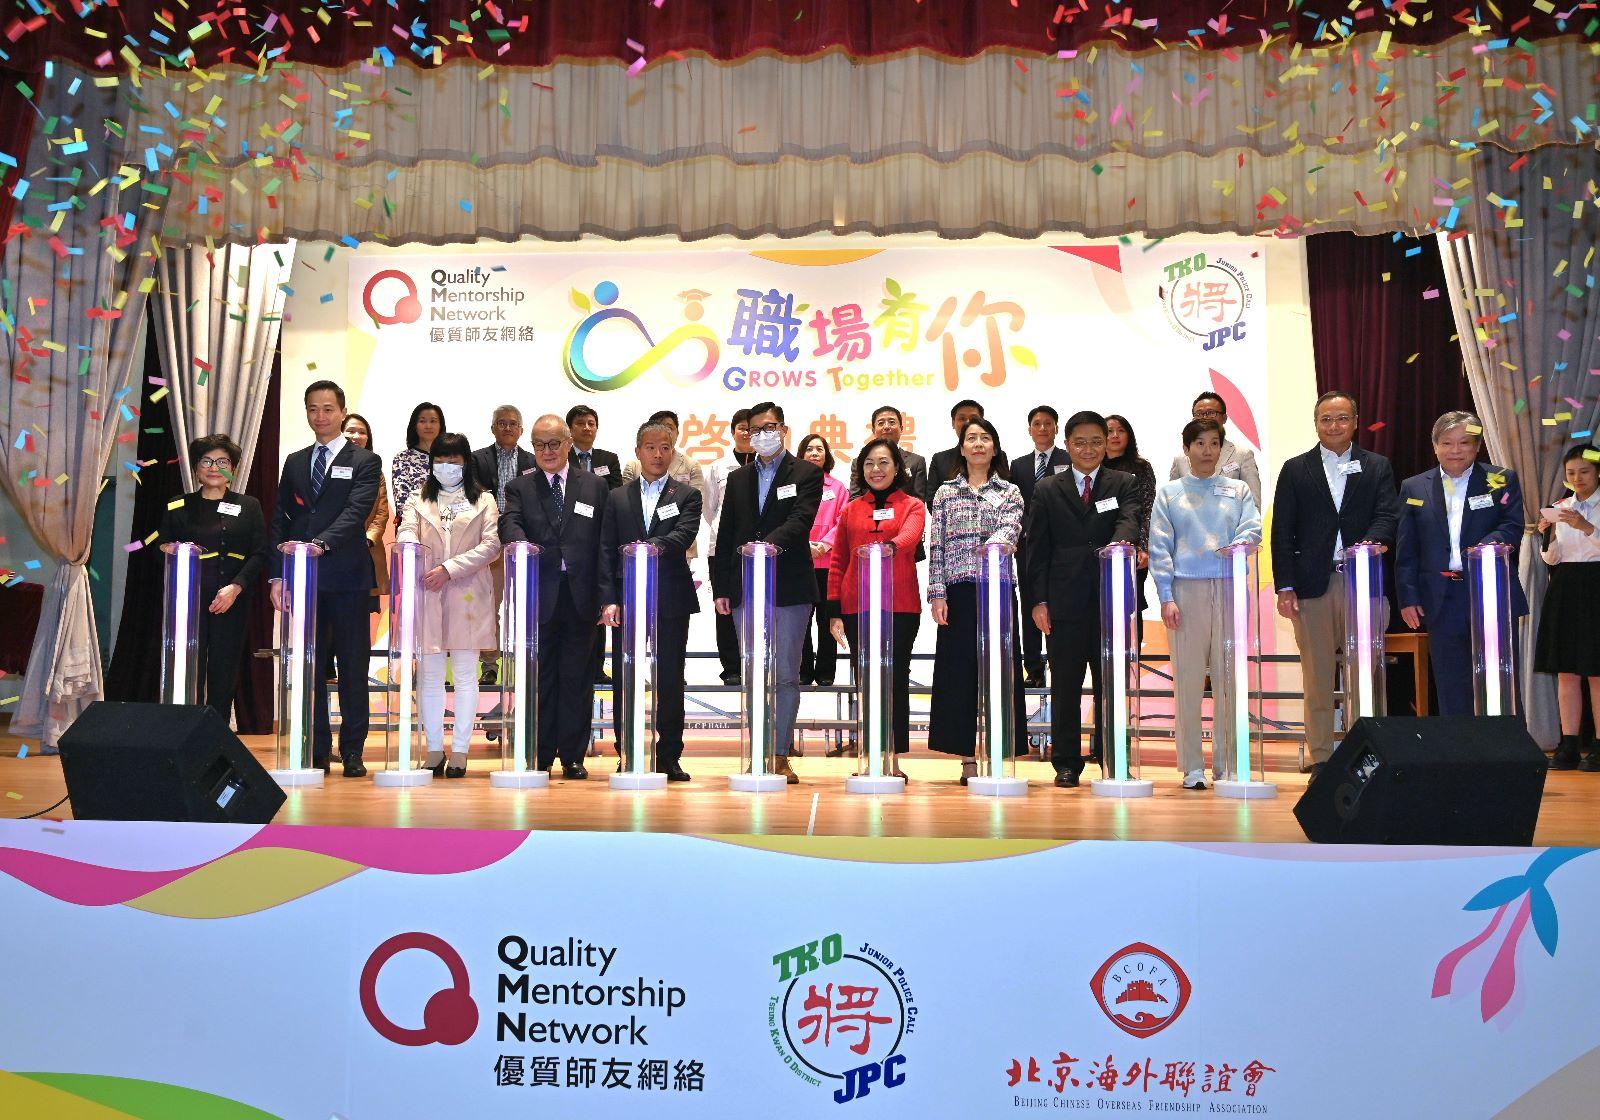 Tseung Kwan O District (TKODIST) Junior Police Call (JPC), in collaboration with Hong Kong Quality Mentorship Network (QMN), held the kick-off ceremony for the firstly-launched life planning project "GROWS Together" today (February 4). Photo shows (from left, front row) member of Board of Directors of QMN, Mrs Amy Chan; the Assistant Commissioner of Police, Public Relations, Mr Joe Chan; the Deputy Director-General of the New Territories Sub-office of the Liaison Office of the Central People’s Government (LOCPG) in the HKSAR, Ms Zhu Yihua; the Vice Chairman of QMN, Dr Moses Cheng; the District Commander of TKODIST, Mr Mak Man-yu; the Secretary for Security, Mr Tang Ping-keung; the Secretary for Home and Youth Affairs, Miss Alice Mak; the Chairman of QMN, Ms Judith Yu; the Deputy Director-General of the Kowloon Sub-office of the LOCPG in the HKSAR, Mr Guo Changyong; the Commissioner of Customs and Excise, Ms Louise Ho; the Chairman of the TKODIST JPC Honorary President Council, Mr Ng Loi-sing; the Chairman of the Sai Kung & Tseung Kwan O Secondary School Heads Association, Mr Tsang Kwok-yung, officiating the kick-off ceremony with other guests.